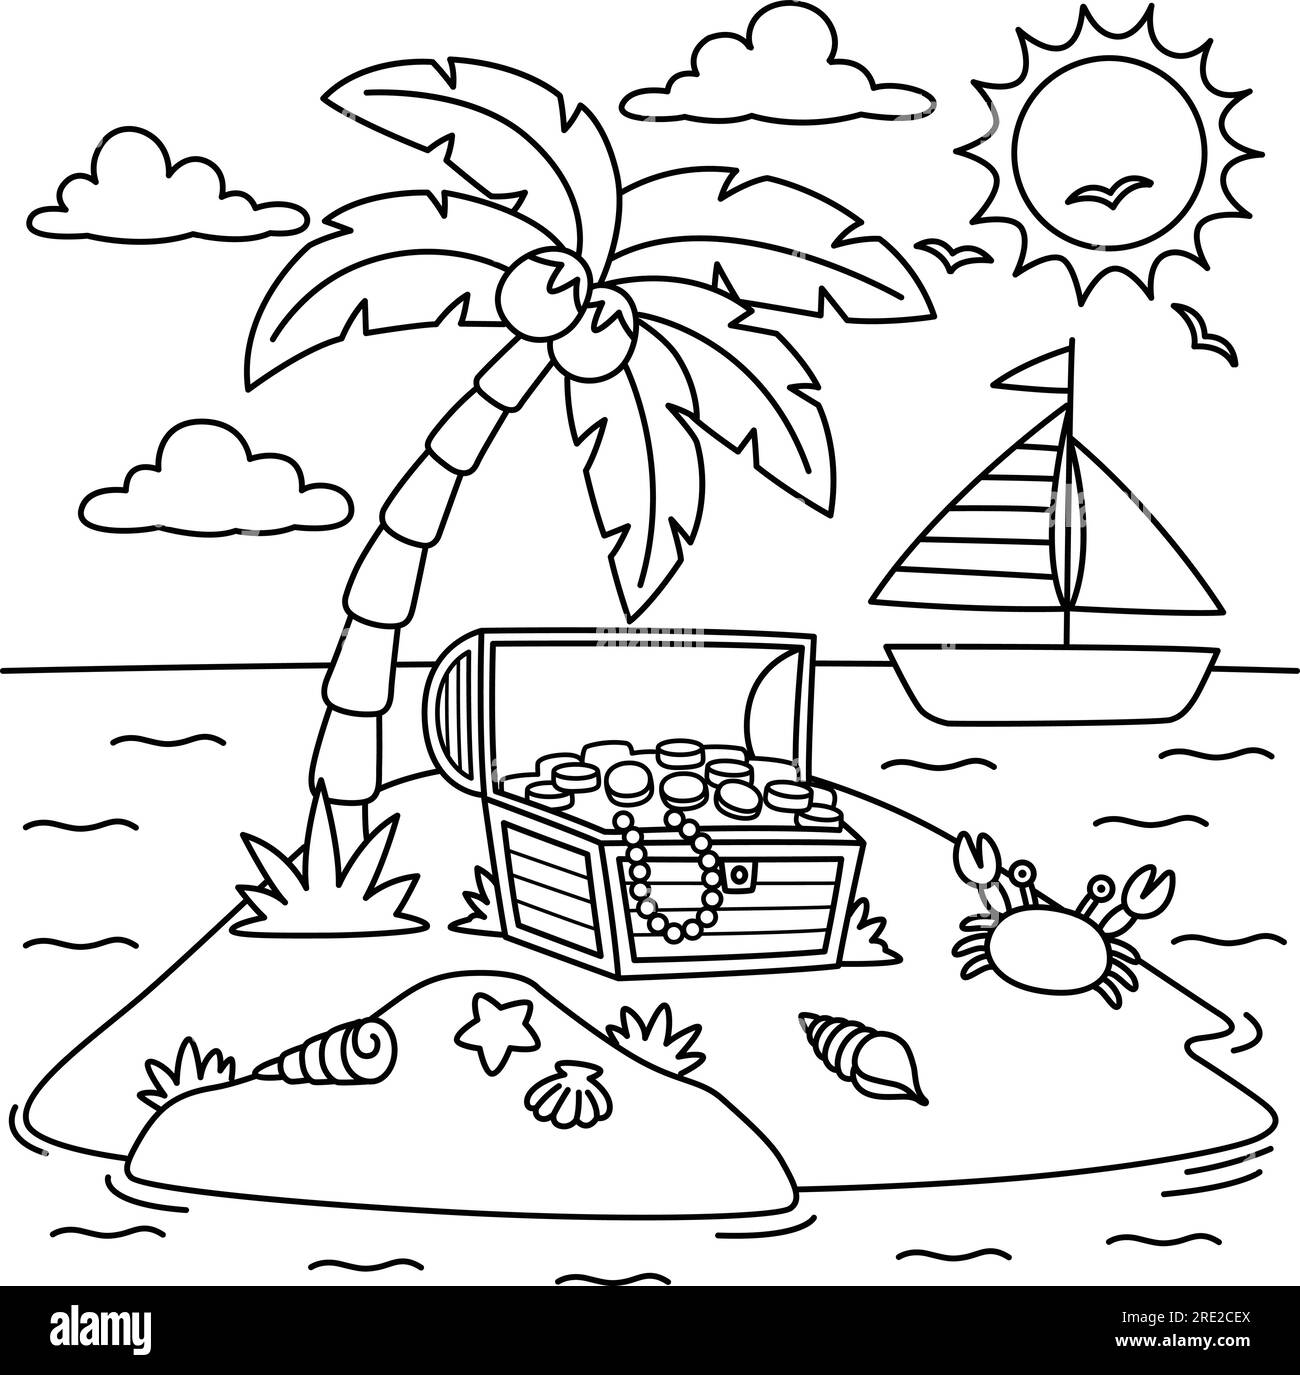 Island summer coloring page for kids stock vector image art